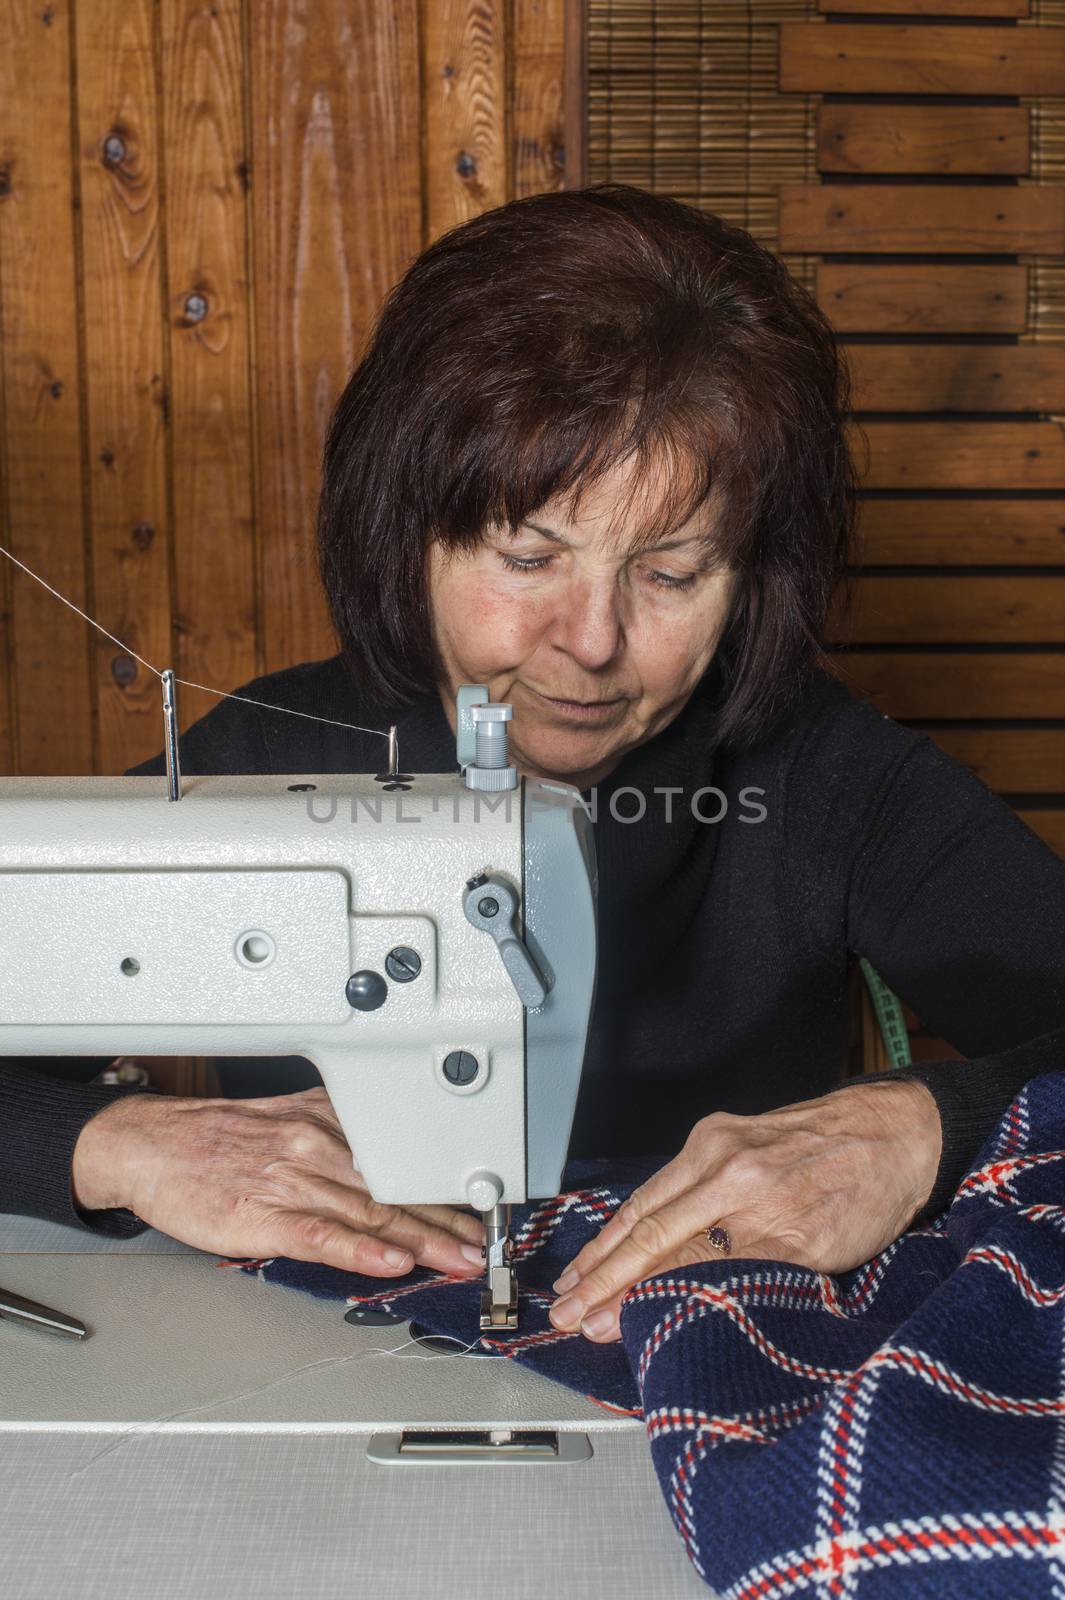 Woman sewing on a sewing machine. Wooden wall